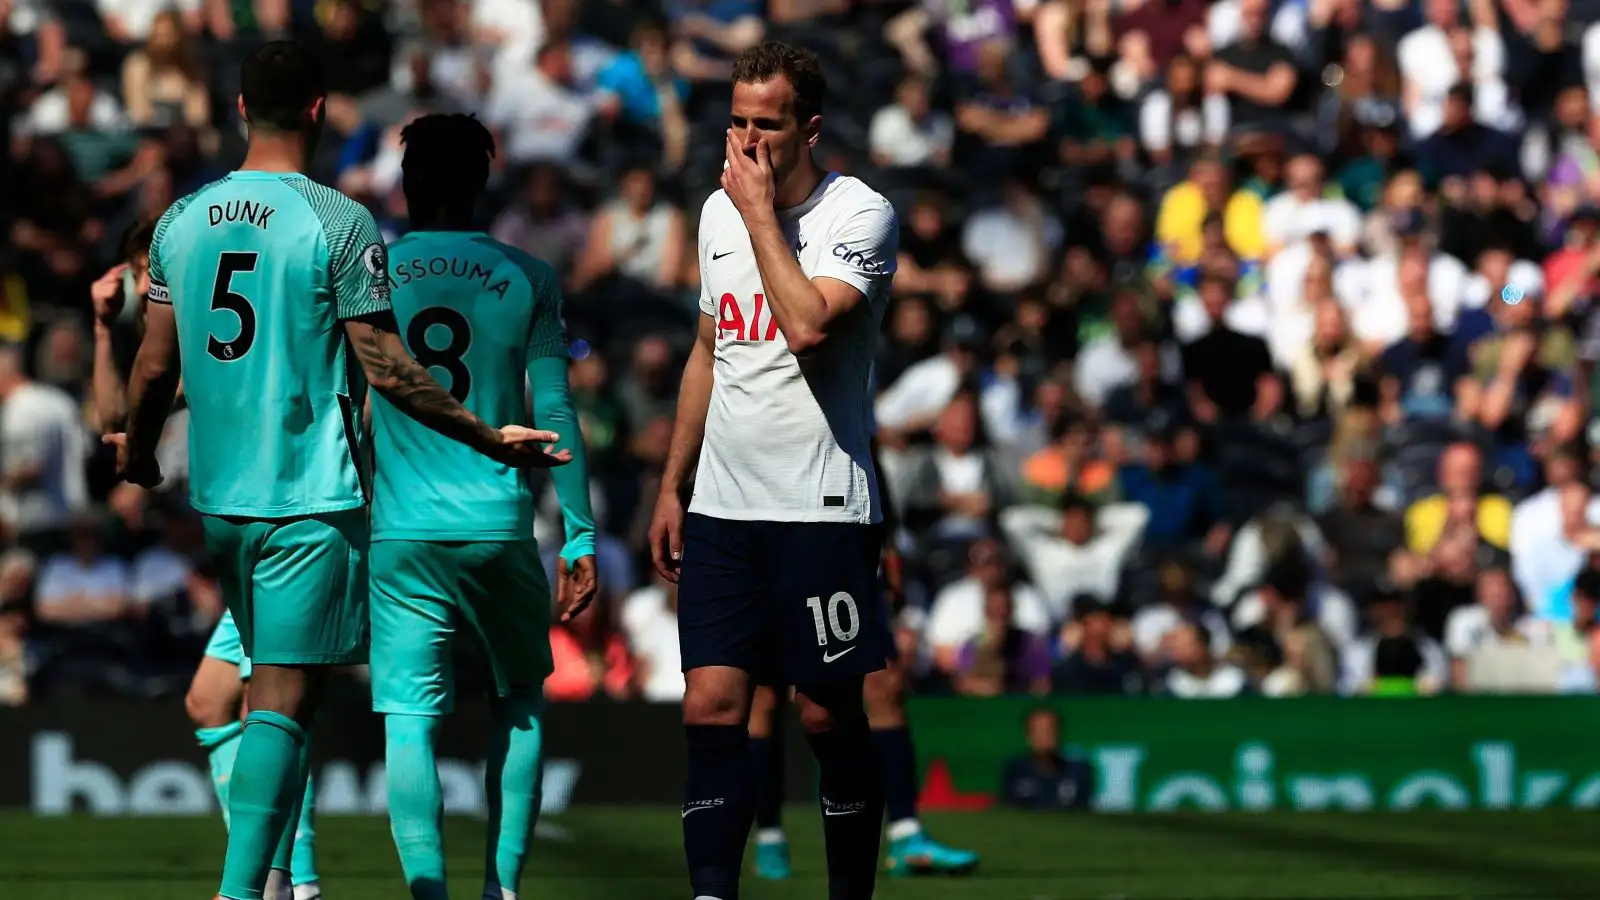 Tottenham striker Harry Kane wipes his face with his hand